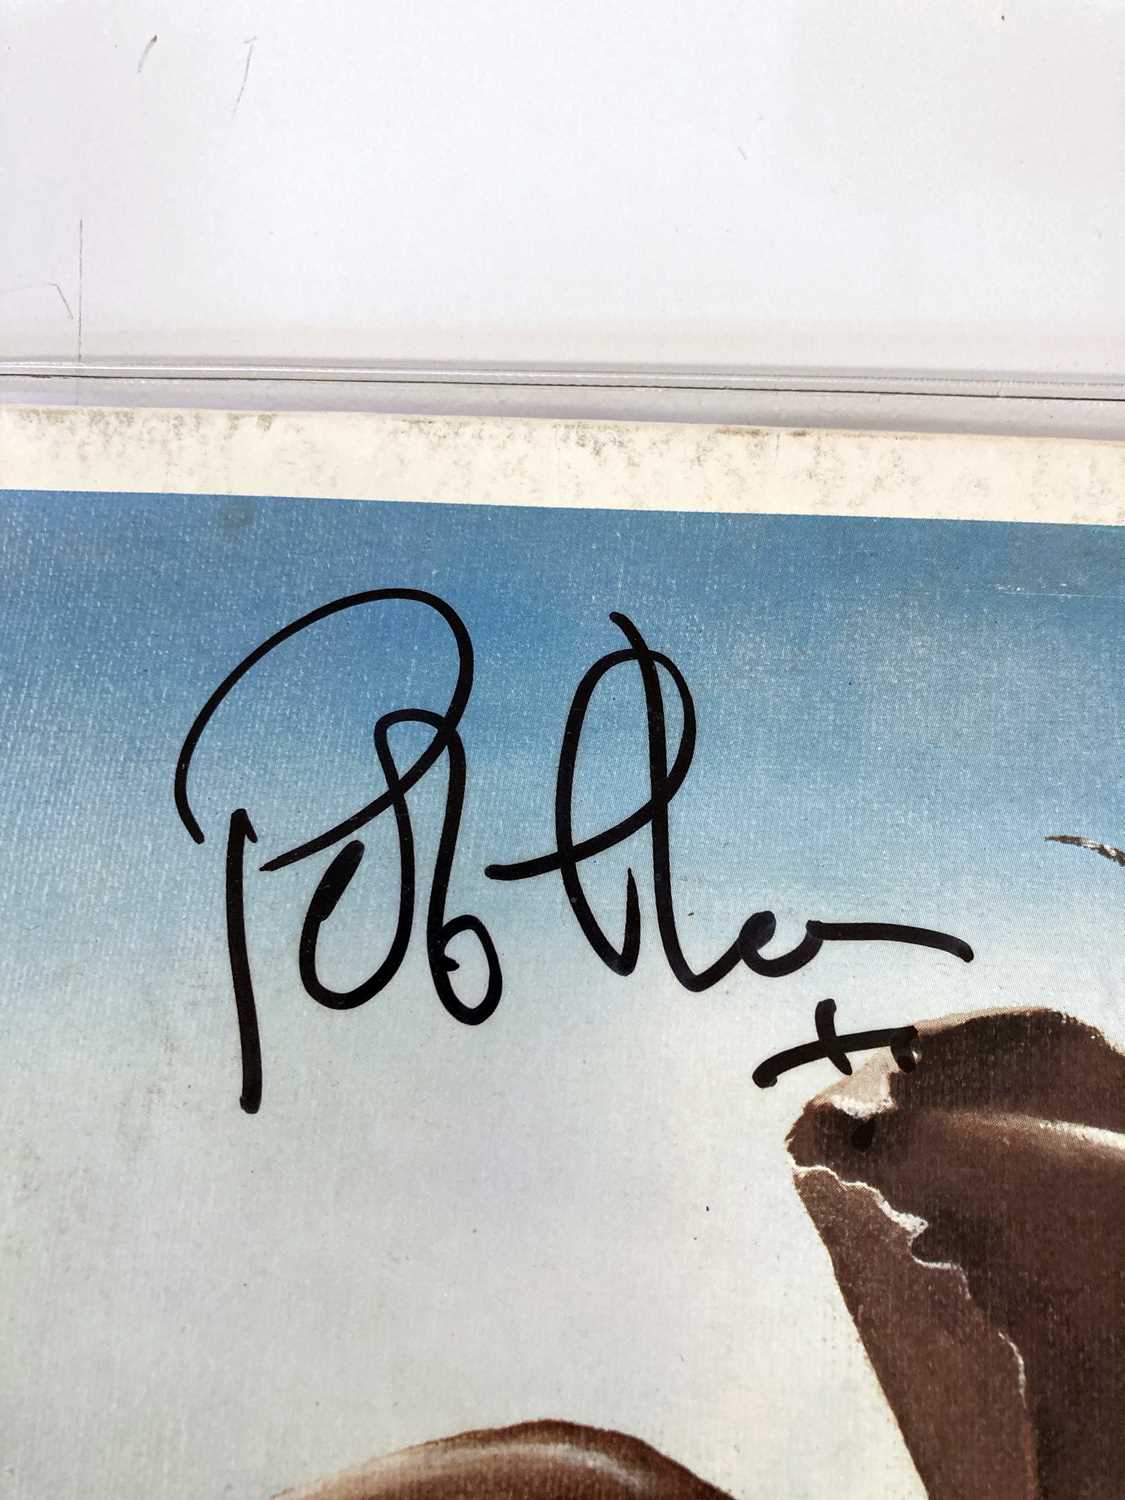 ELVIS COSTELLO SIGNED RECORDS. - Image 2 of 4